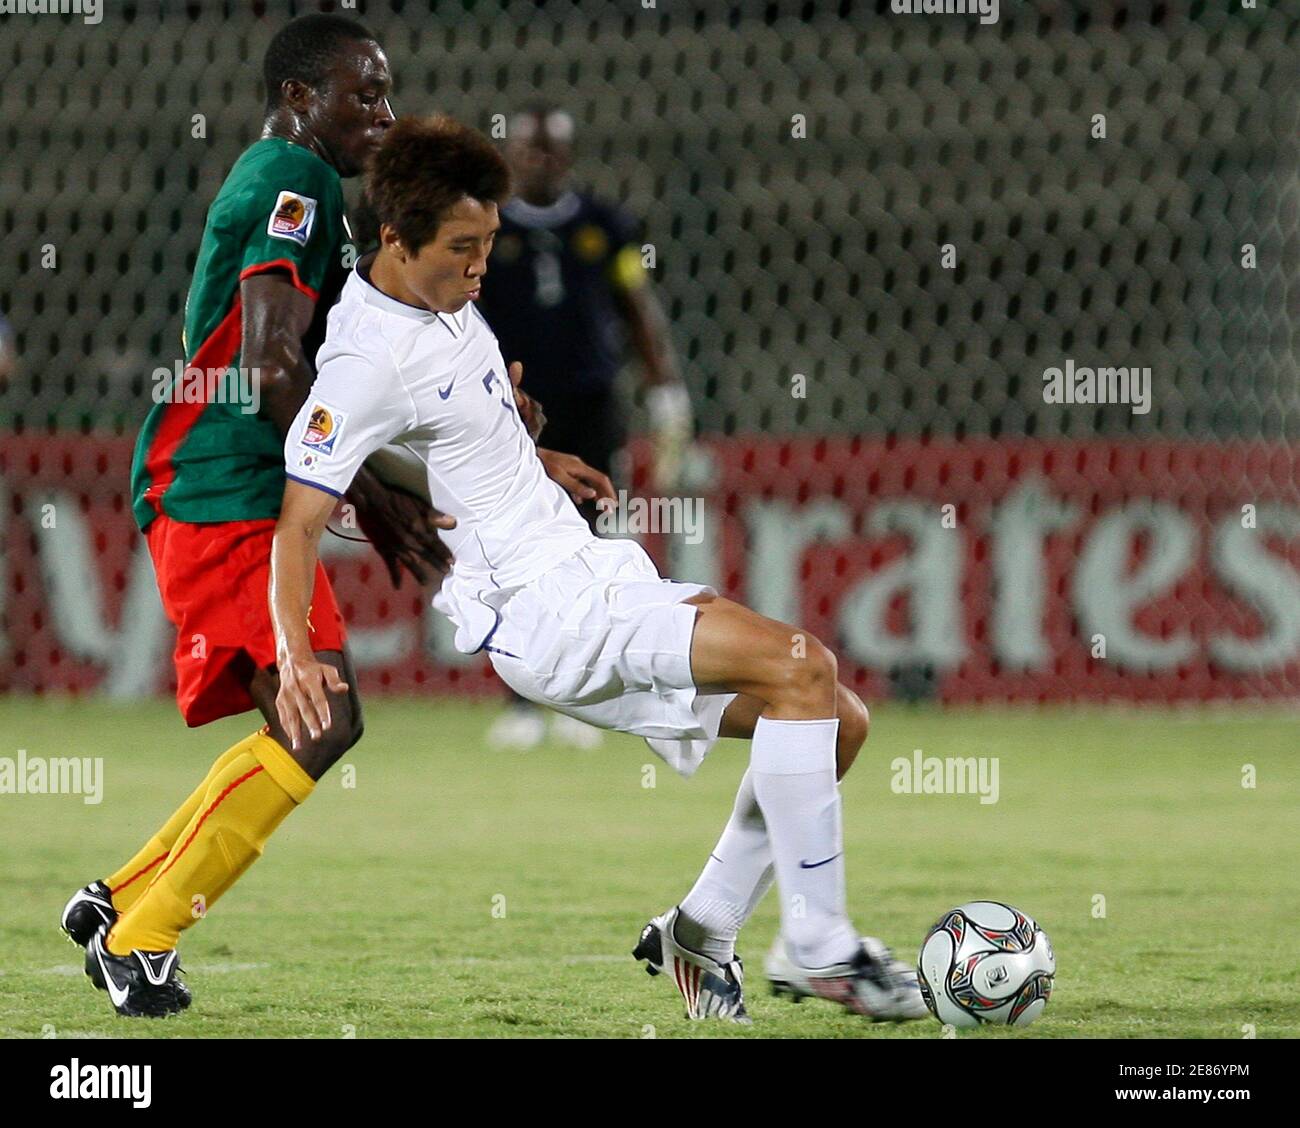 Enow Tabot of Cameroon (L) is challenged by Cheol Ja Koo of South Korea during their FIFA U-20 World Cup group C soccer match in Suez City September 26, 2009.   REUTERS/Amr Abdullah Dalsh (EGYPT SPORT SOCCER) Stock Photo